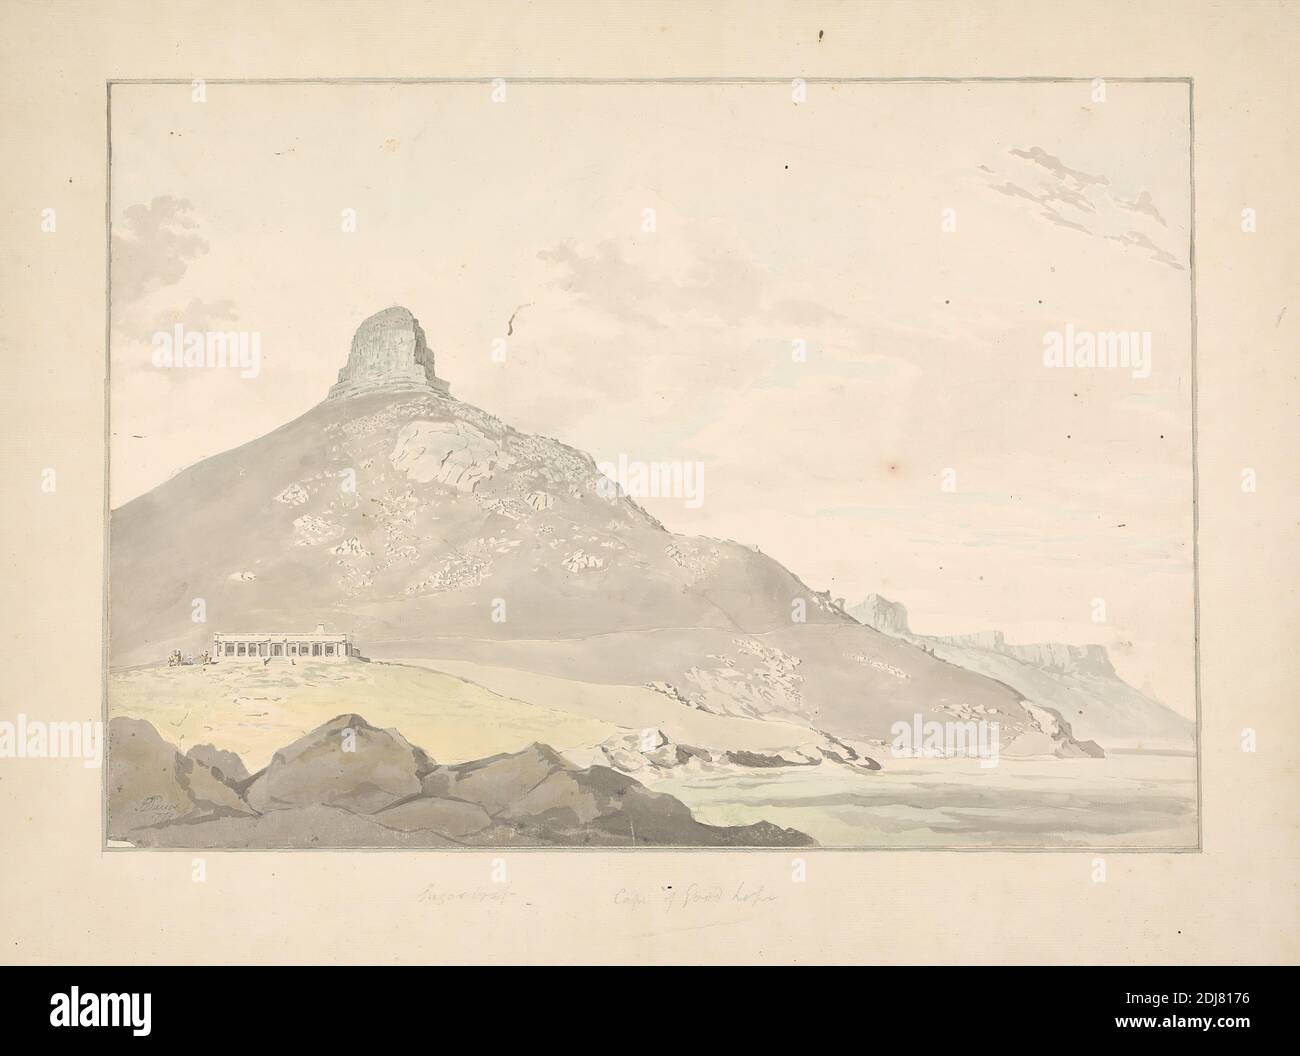 Sugar Loaf, Cape of Good Hope, Samuel Davis, 1757–1819, British, 1779, Watercolor, with pen, in gray ink, gray wash, and graphite on medium, slightly textured, cream, laid paper, mounted on, thick, moderately textured, cream, laid paper, Mount: 18 × 25 7/16 inches (45.7 × 64.6 cm) and Sheet: 13 1/2 × 19 1/4 inches (34.3 × 48.9 cm Stock Photo